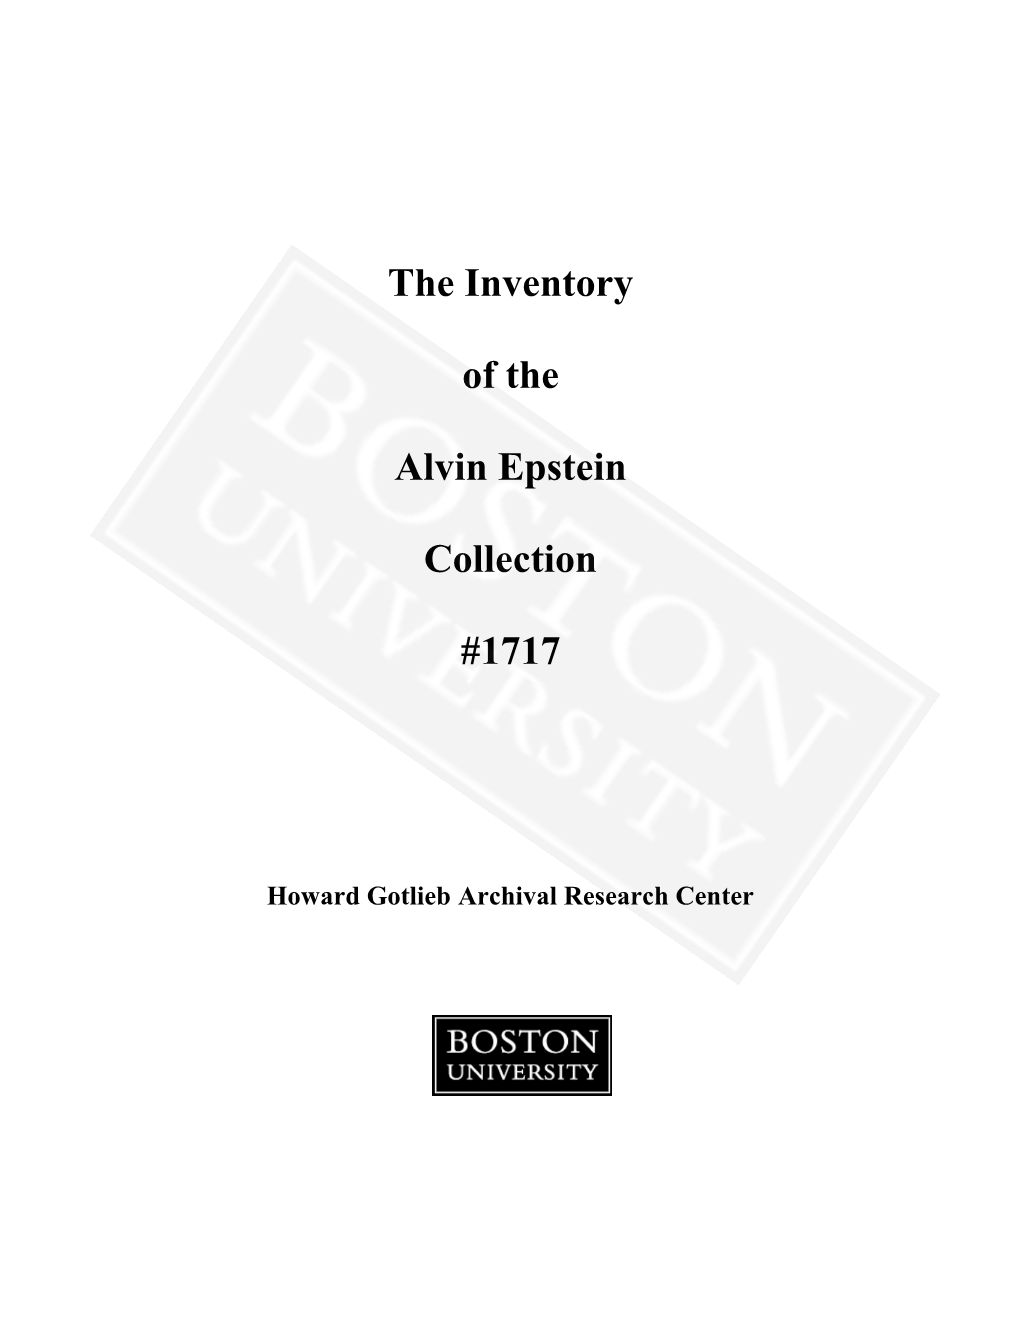 The Inventory of the Alvin Epstein Collection #1717